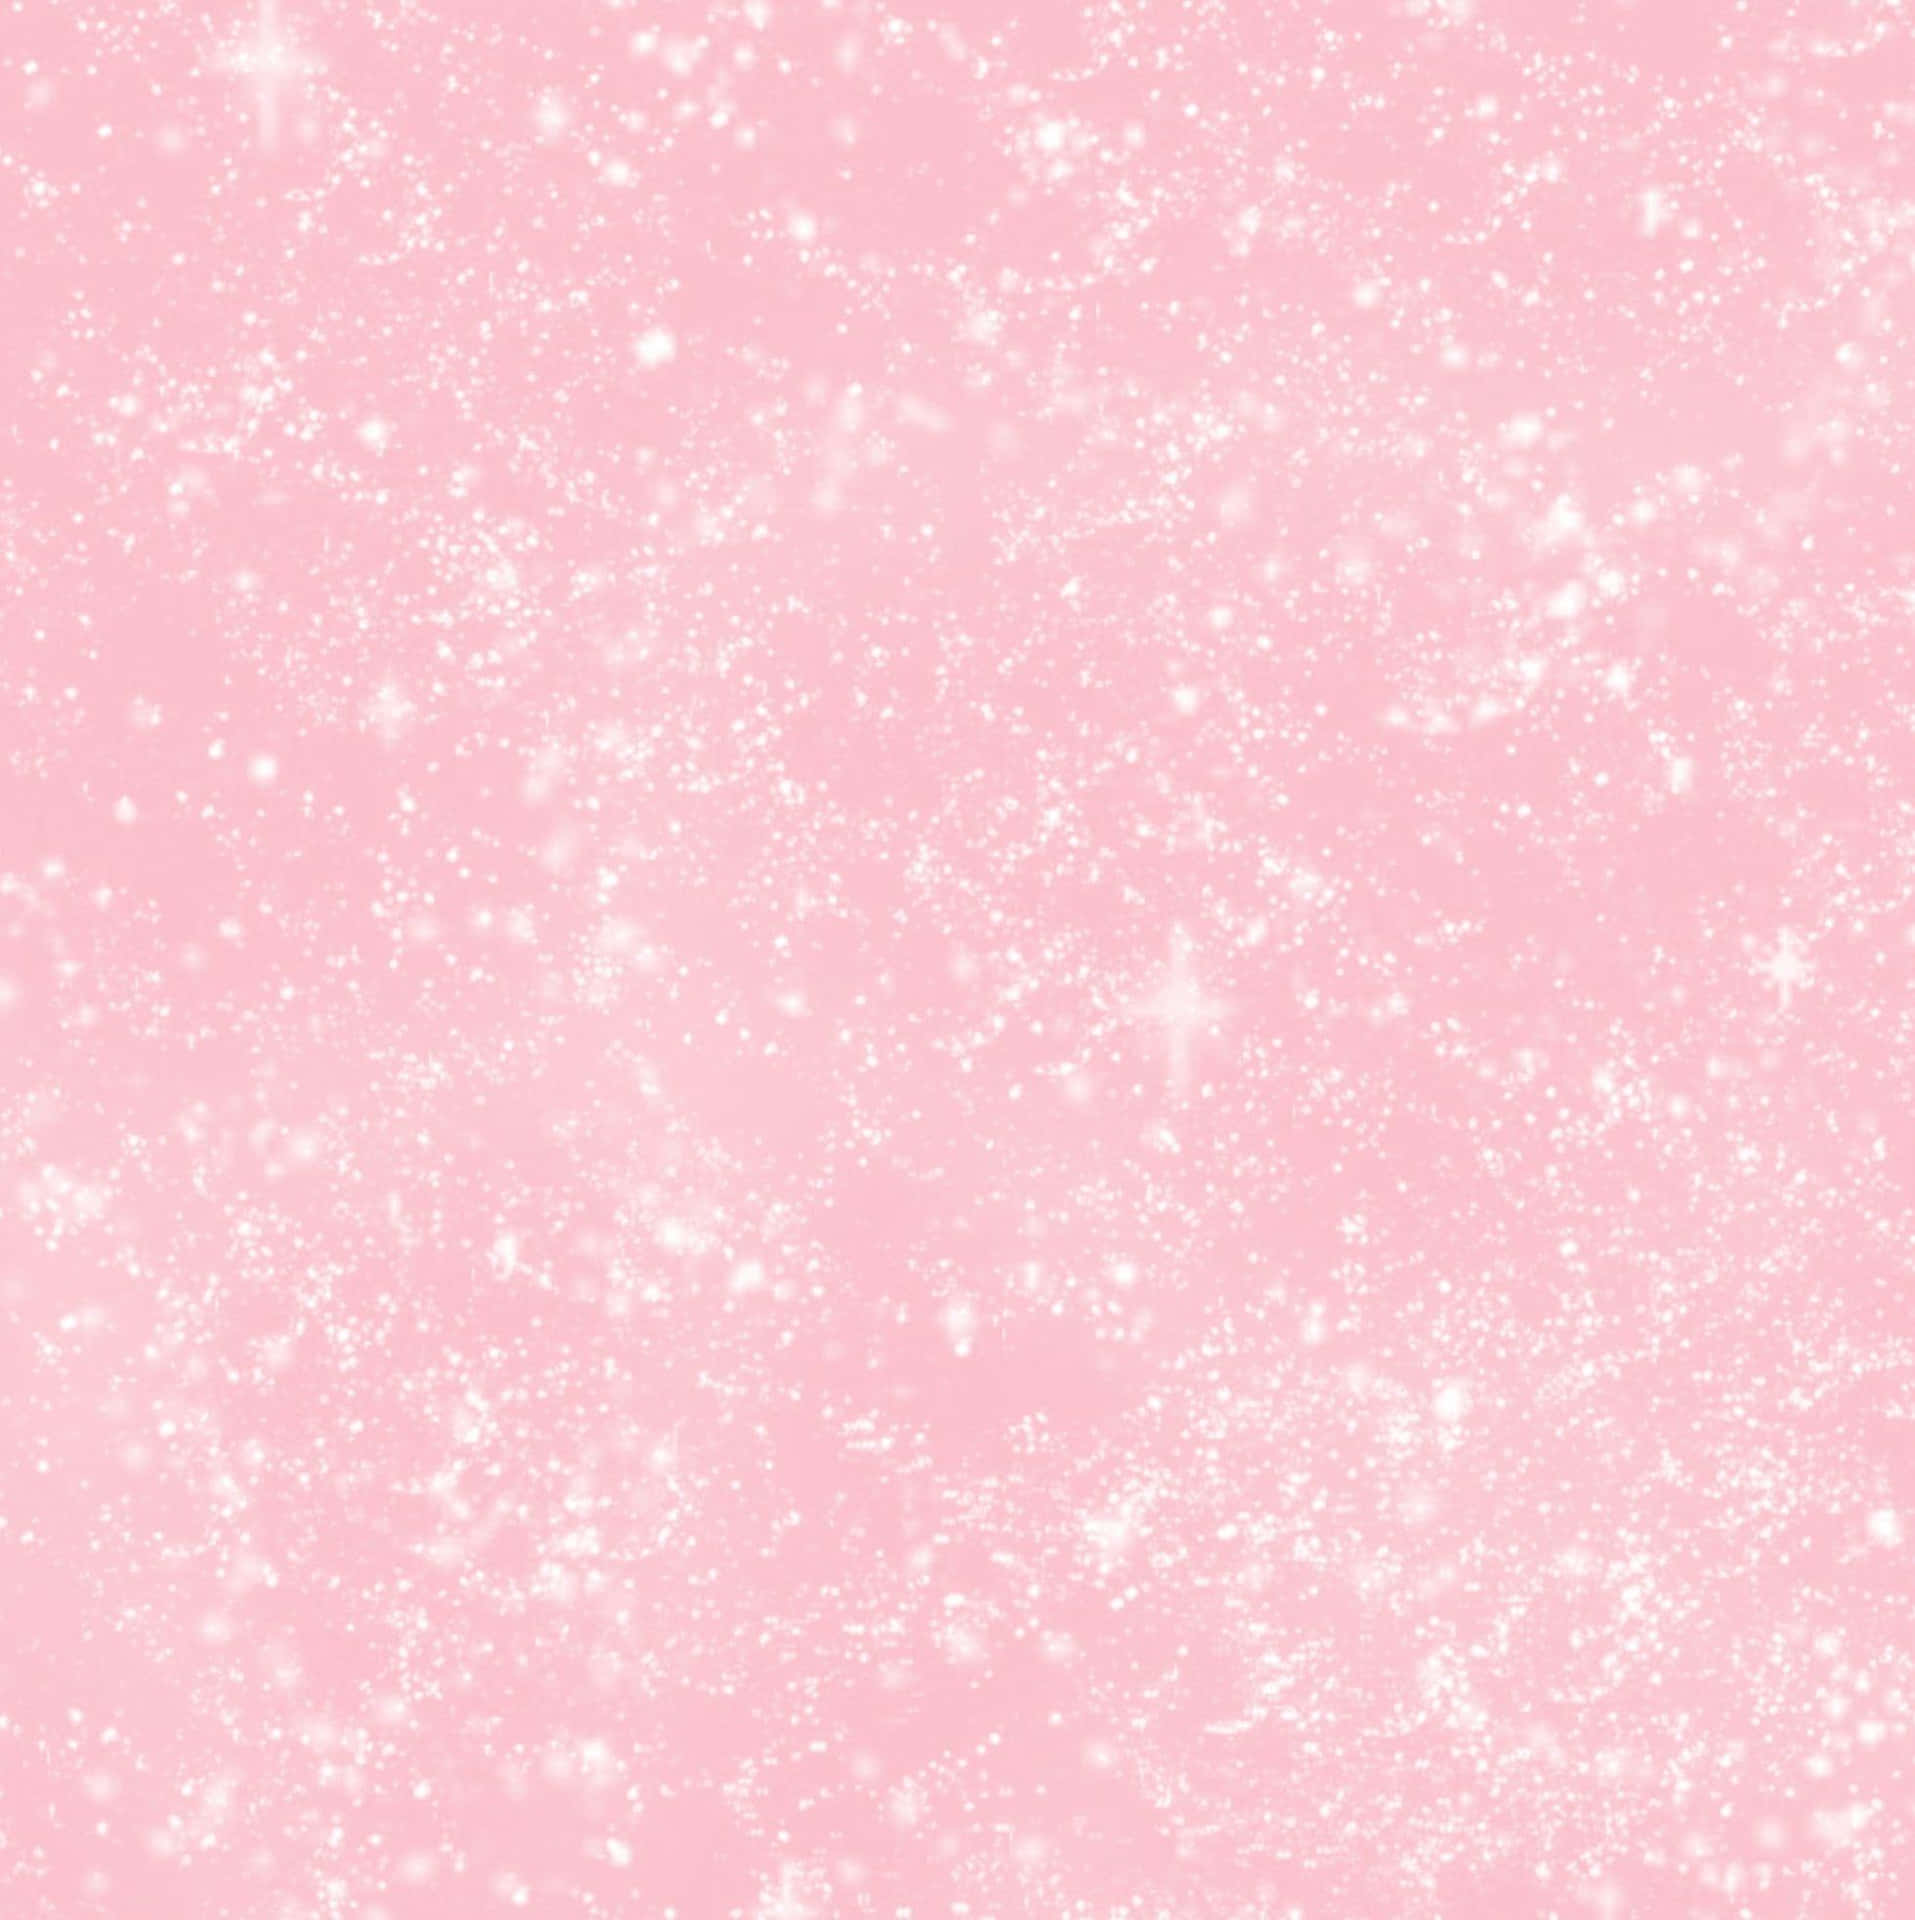 A Pink Background With Stars And White Stars